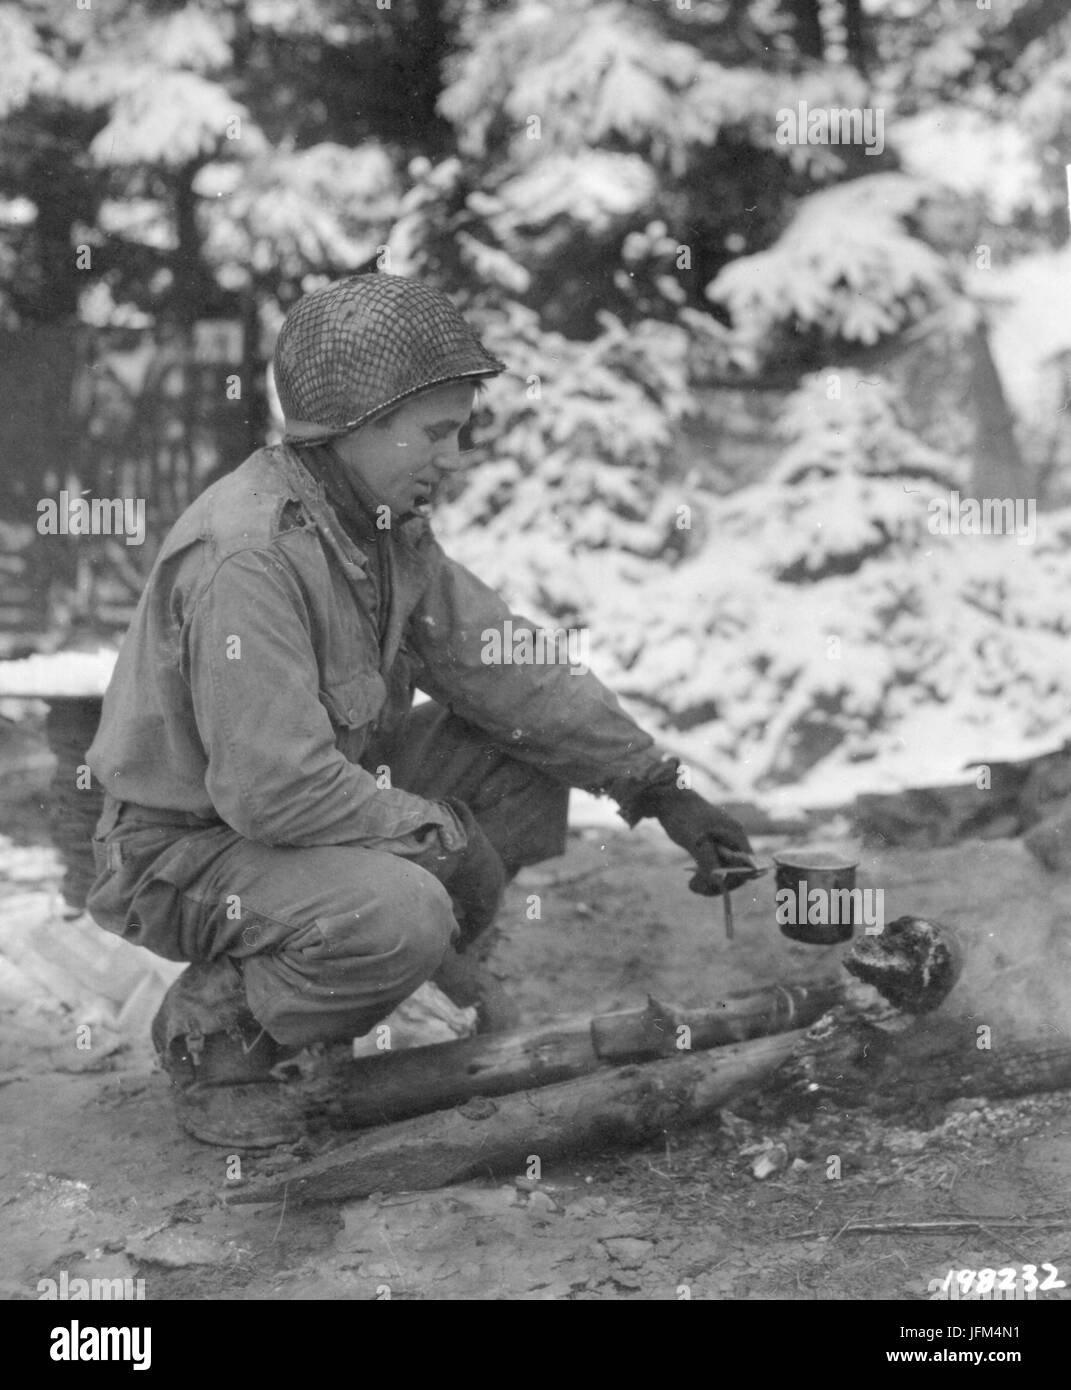 Pvt Floyd Corum heats coffee in a canteen cup over a log fire after a heavy snowfall. ETO, 12/22/44, Belgium Stock Photo